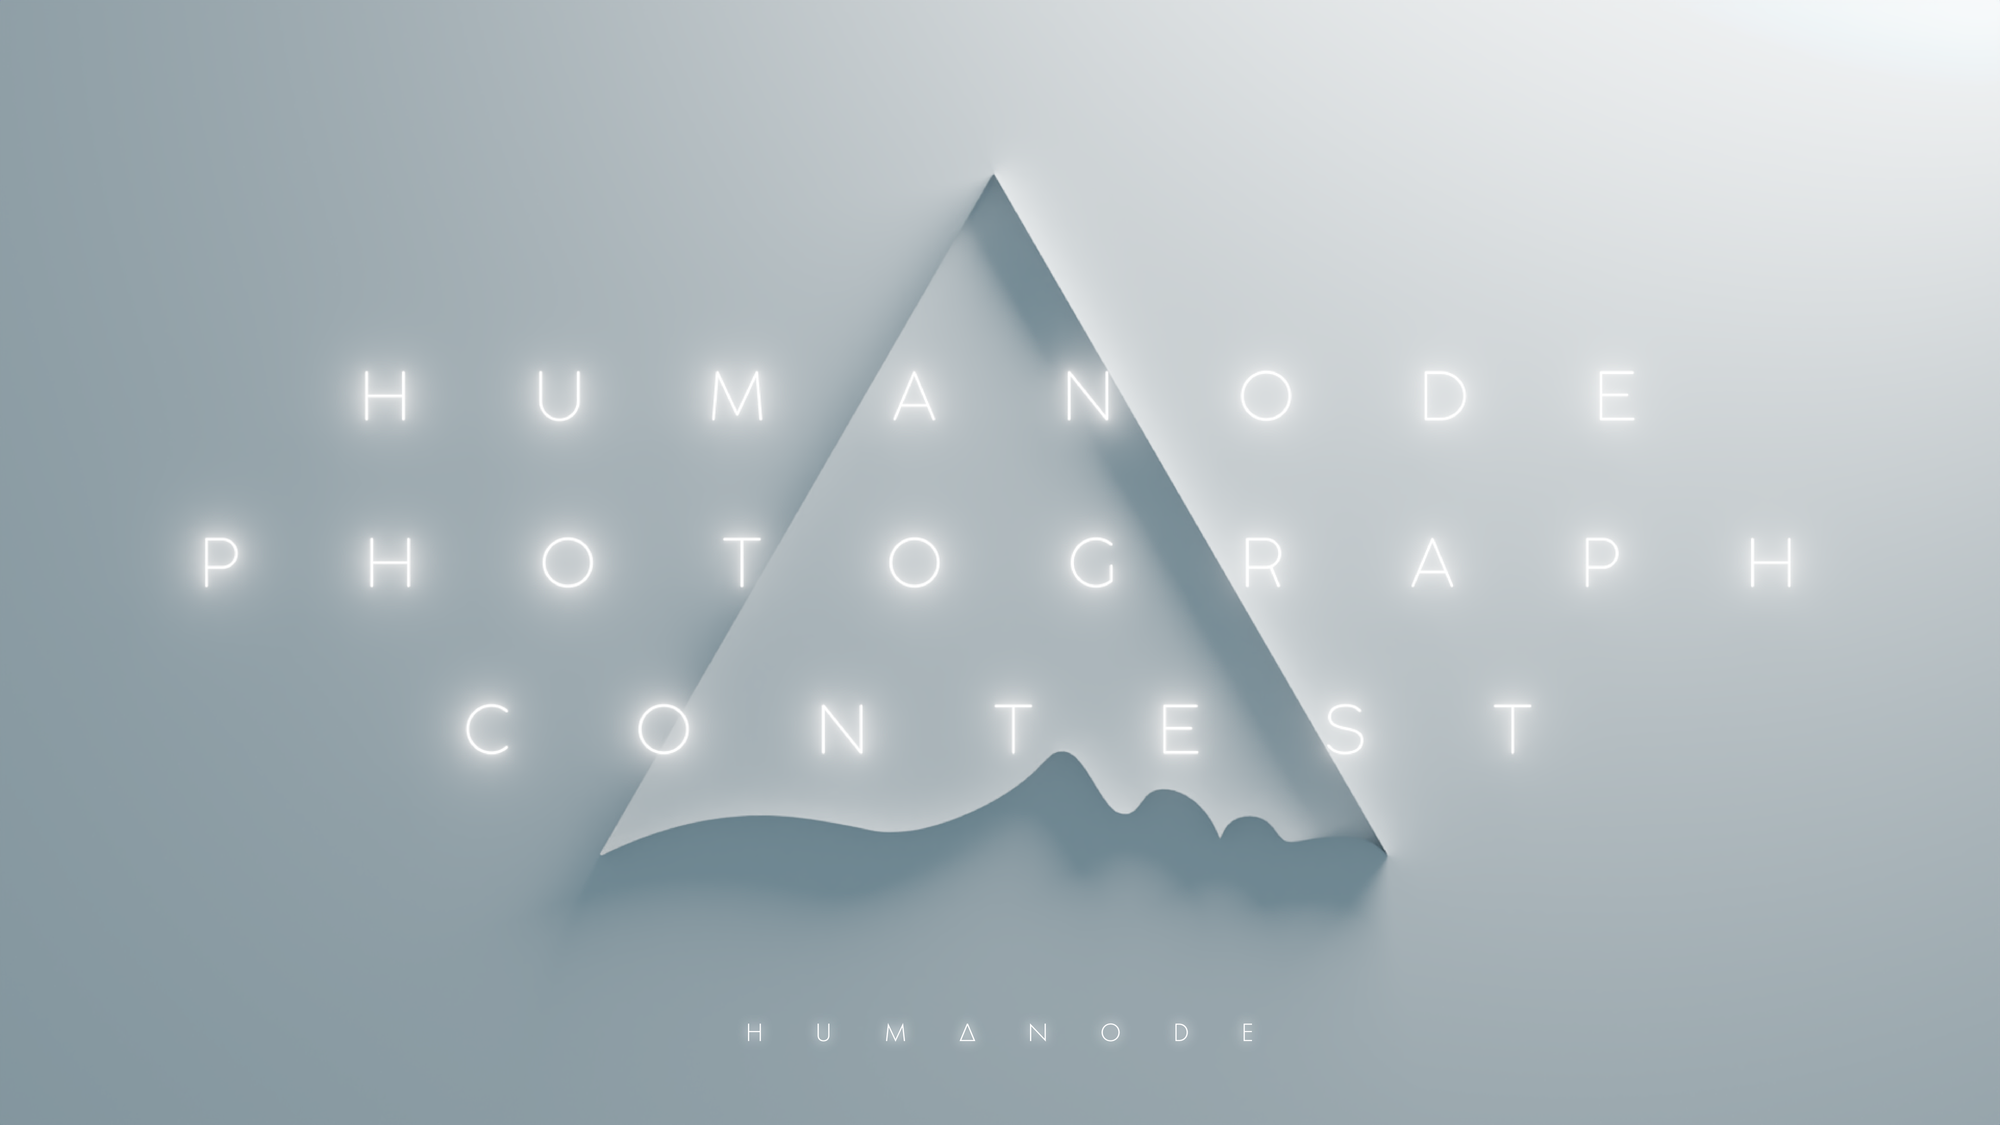 Focus on Humanode: A Unique Photo Contest for the Creative Minds